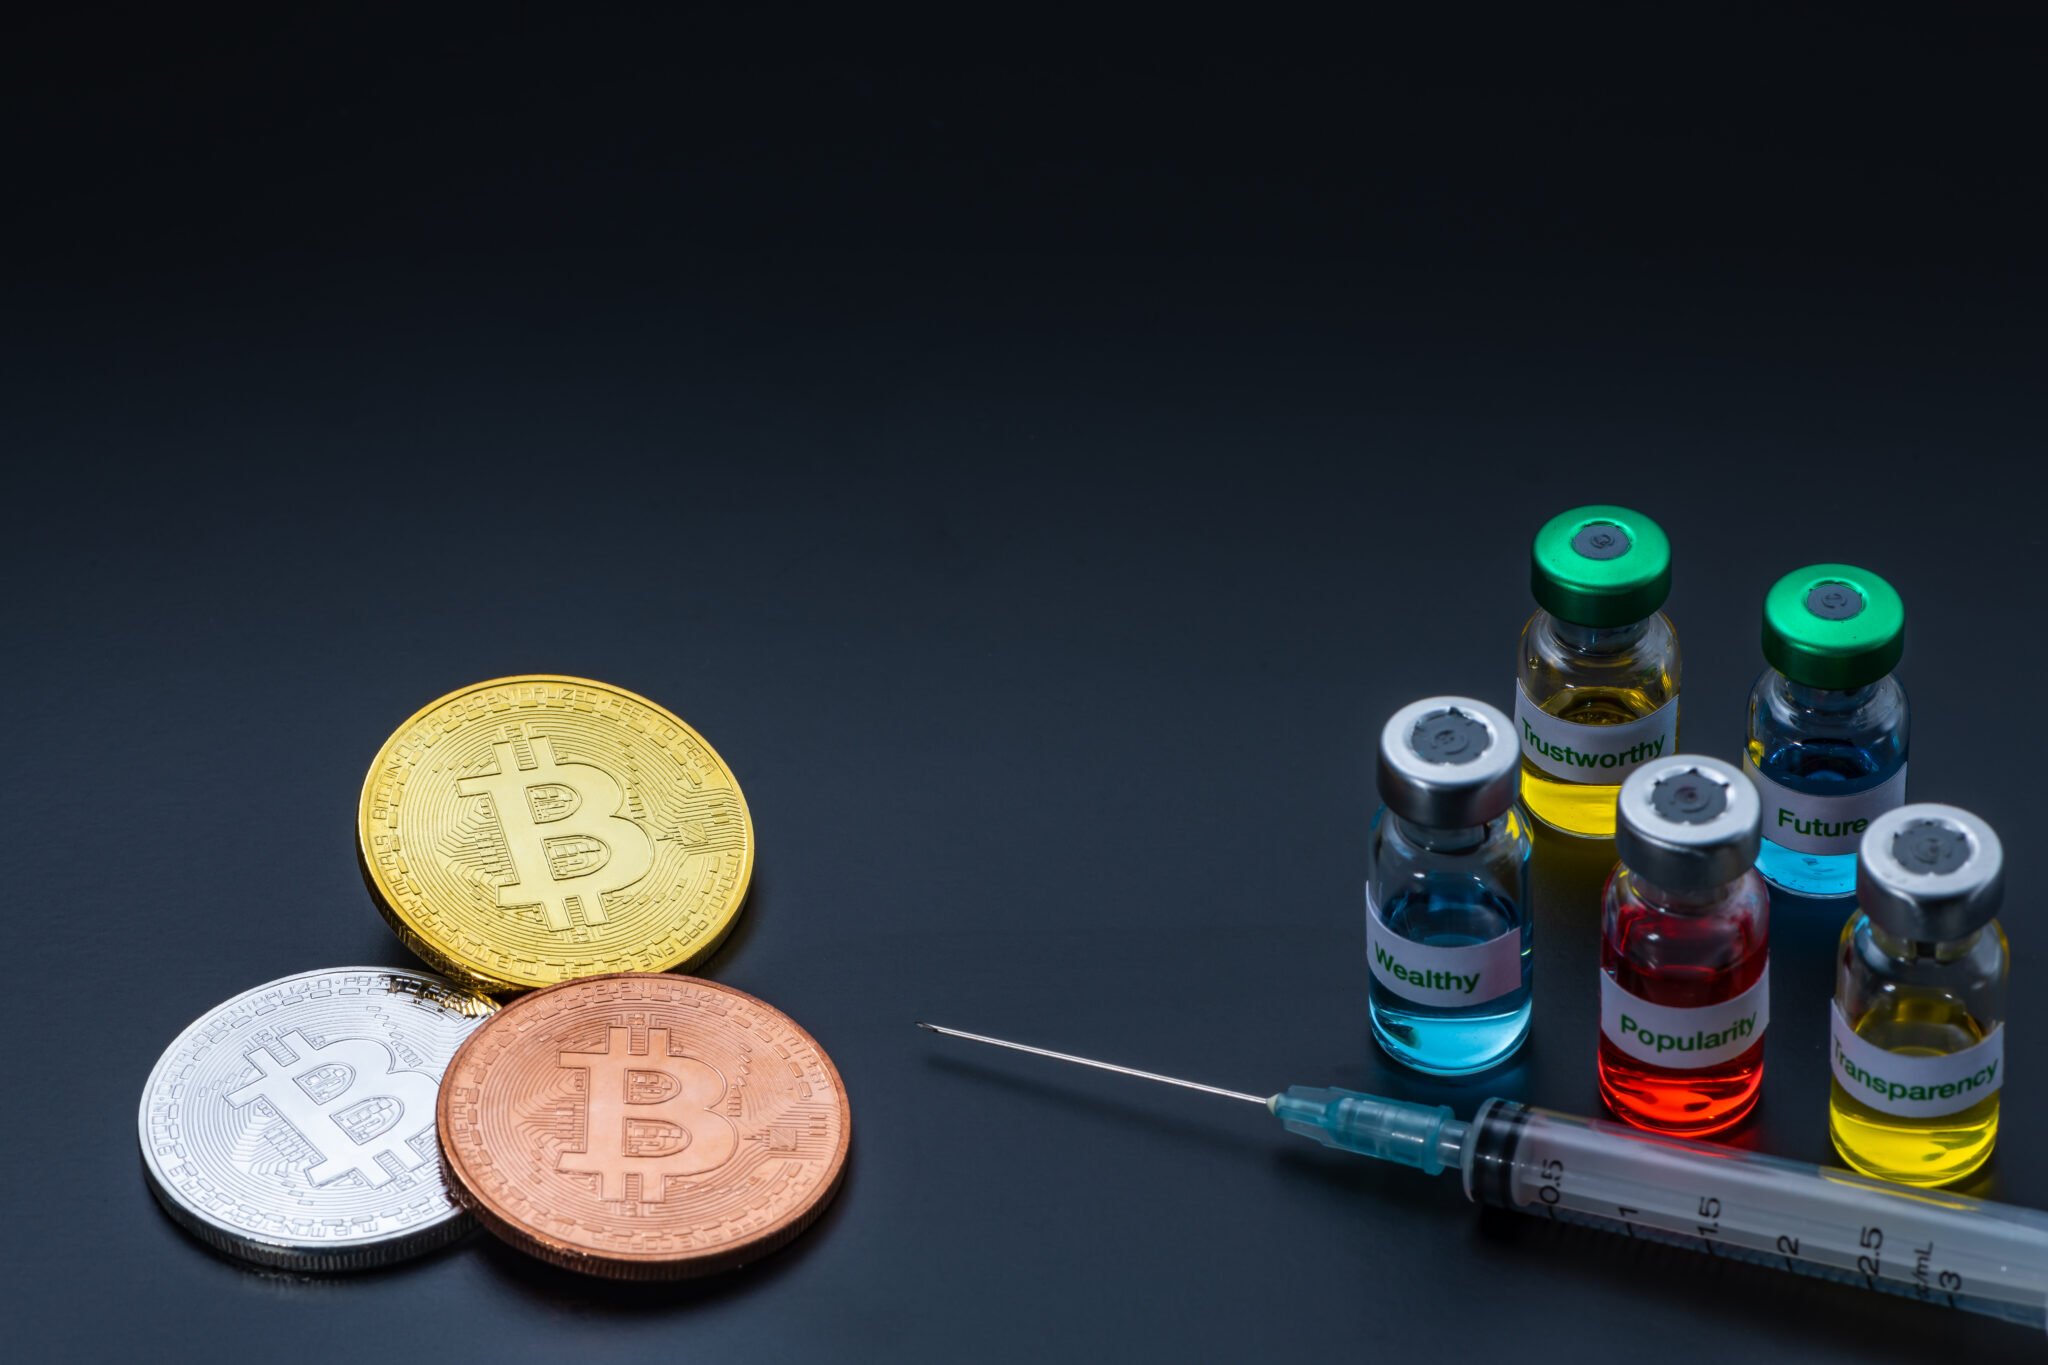 Crypto currency with five attributes make healthier economic soc